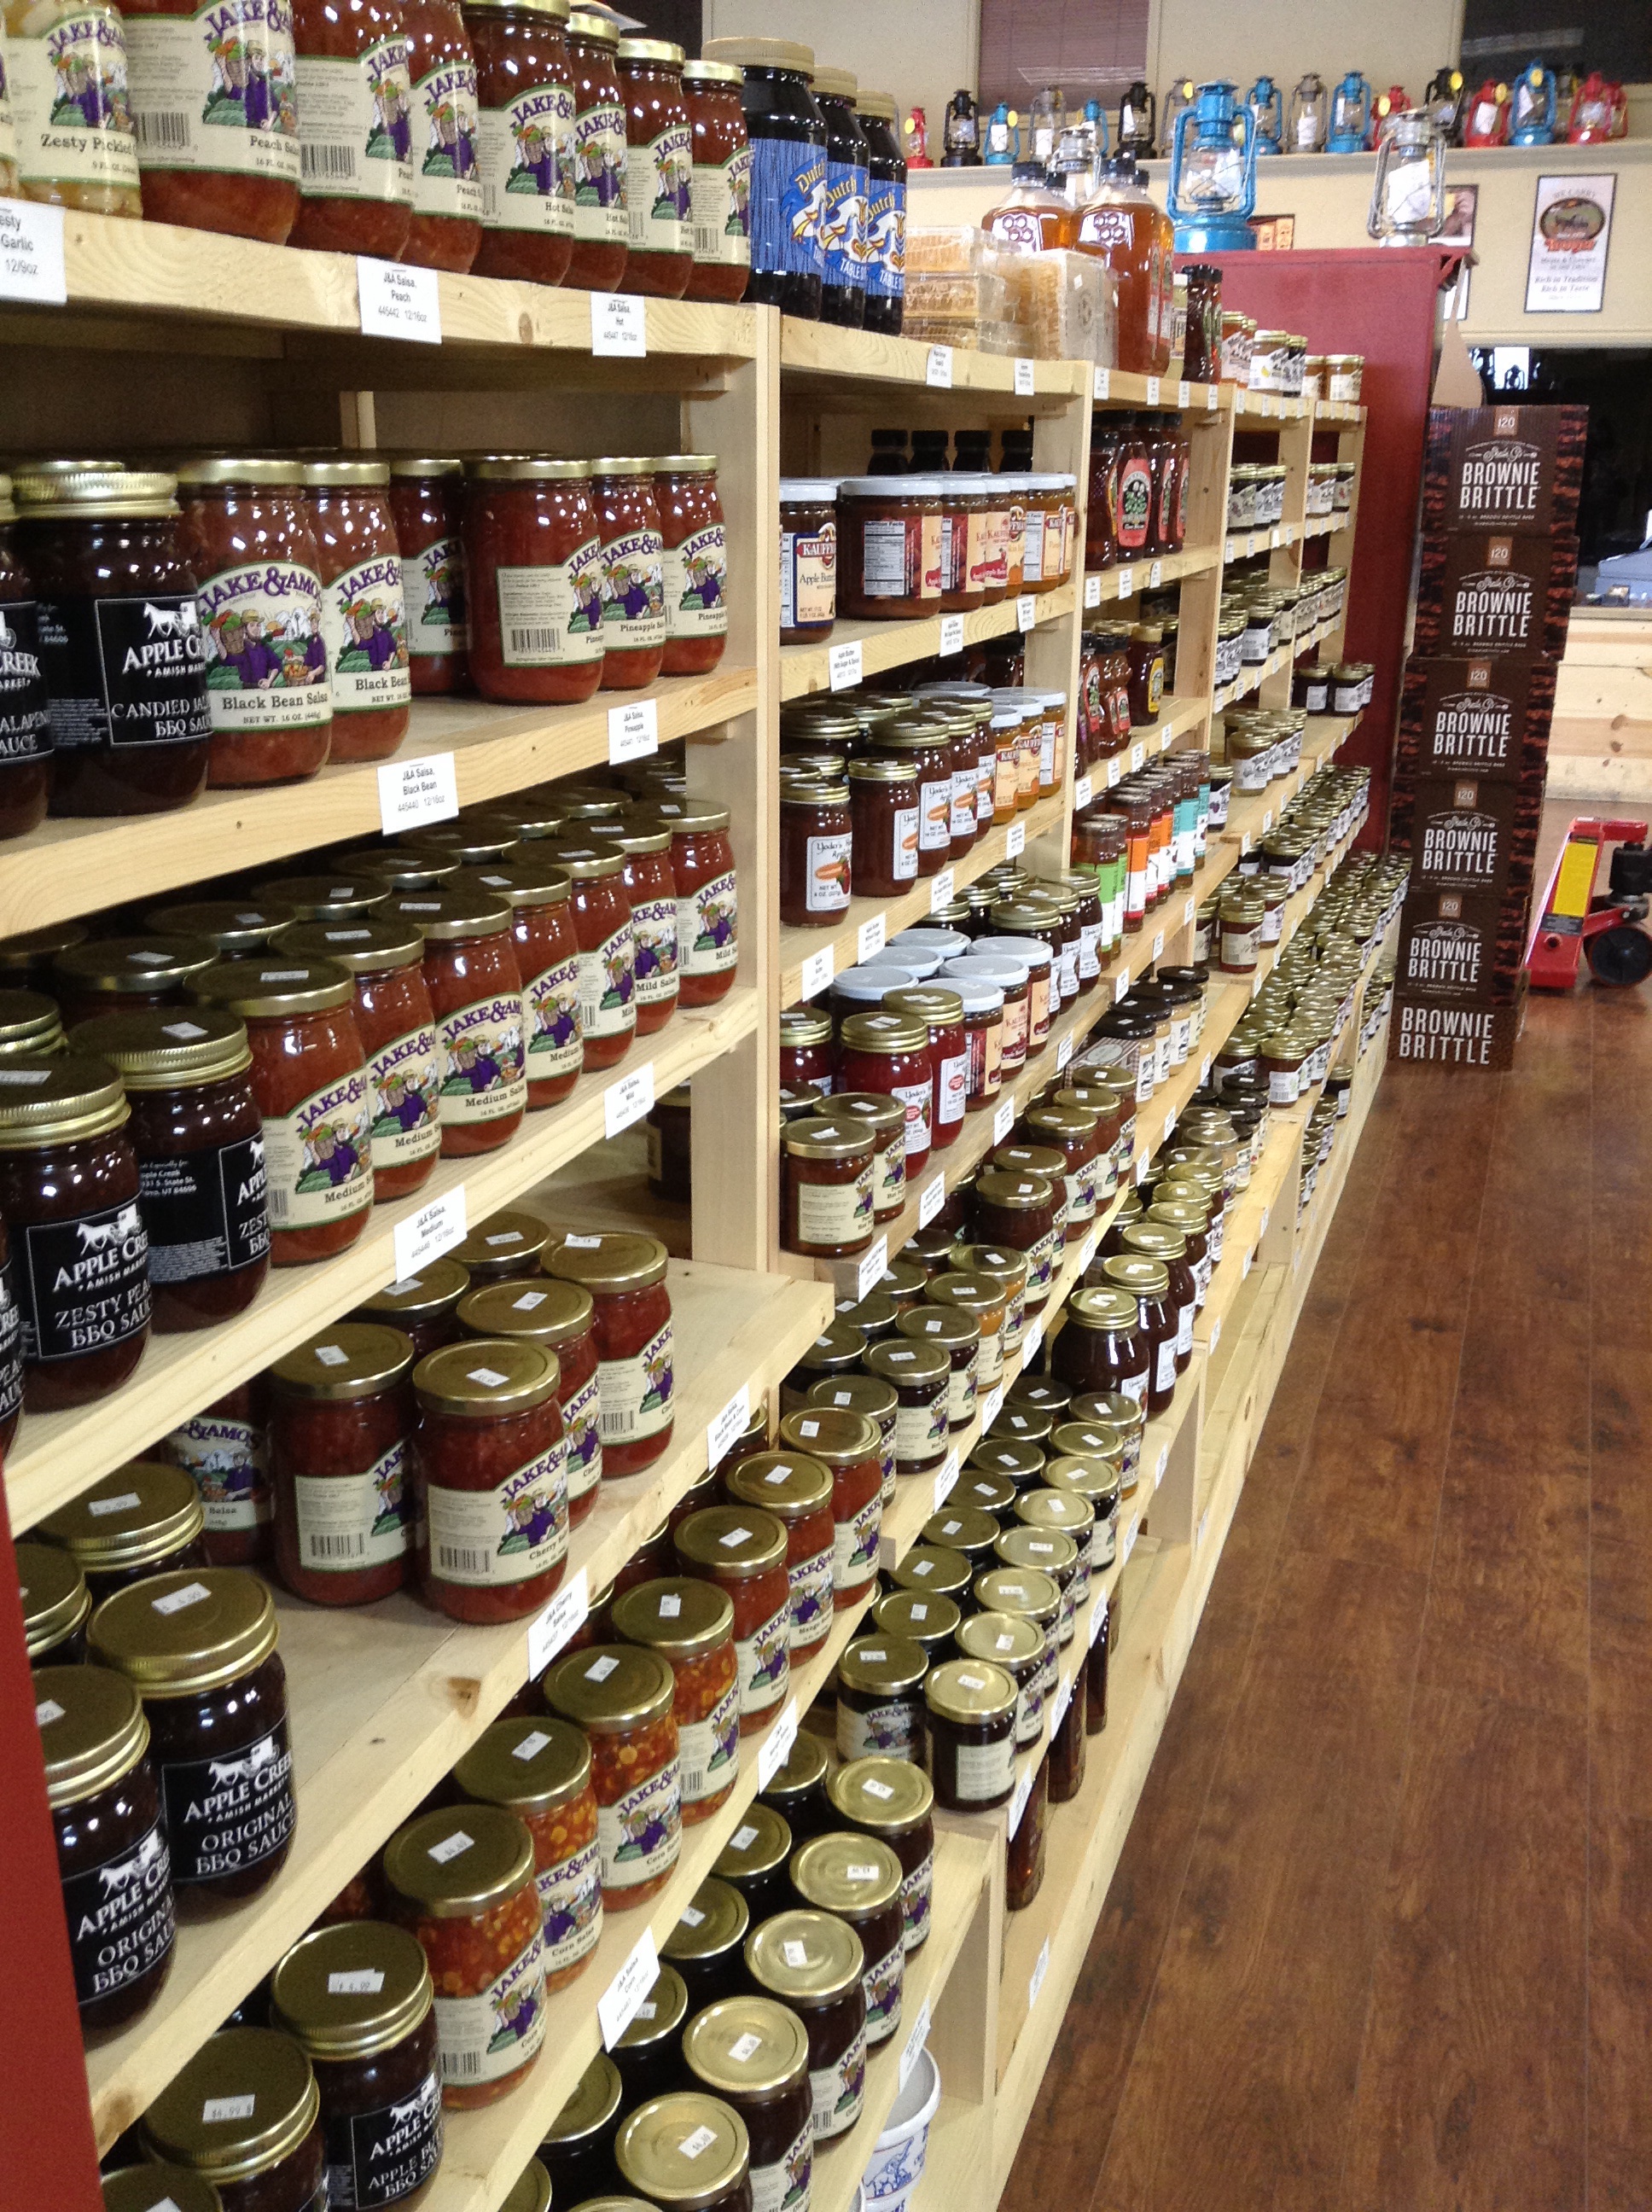 Authentic Amish market joins as new Provo business The Daily Universe